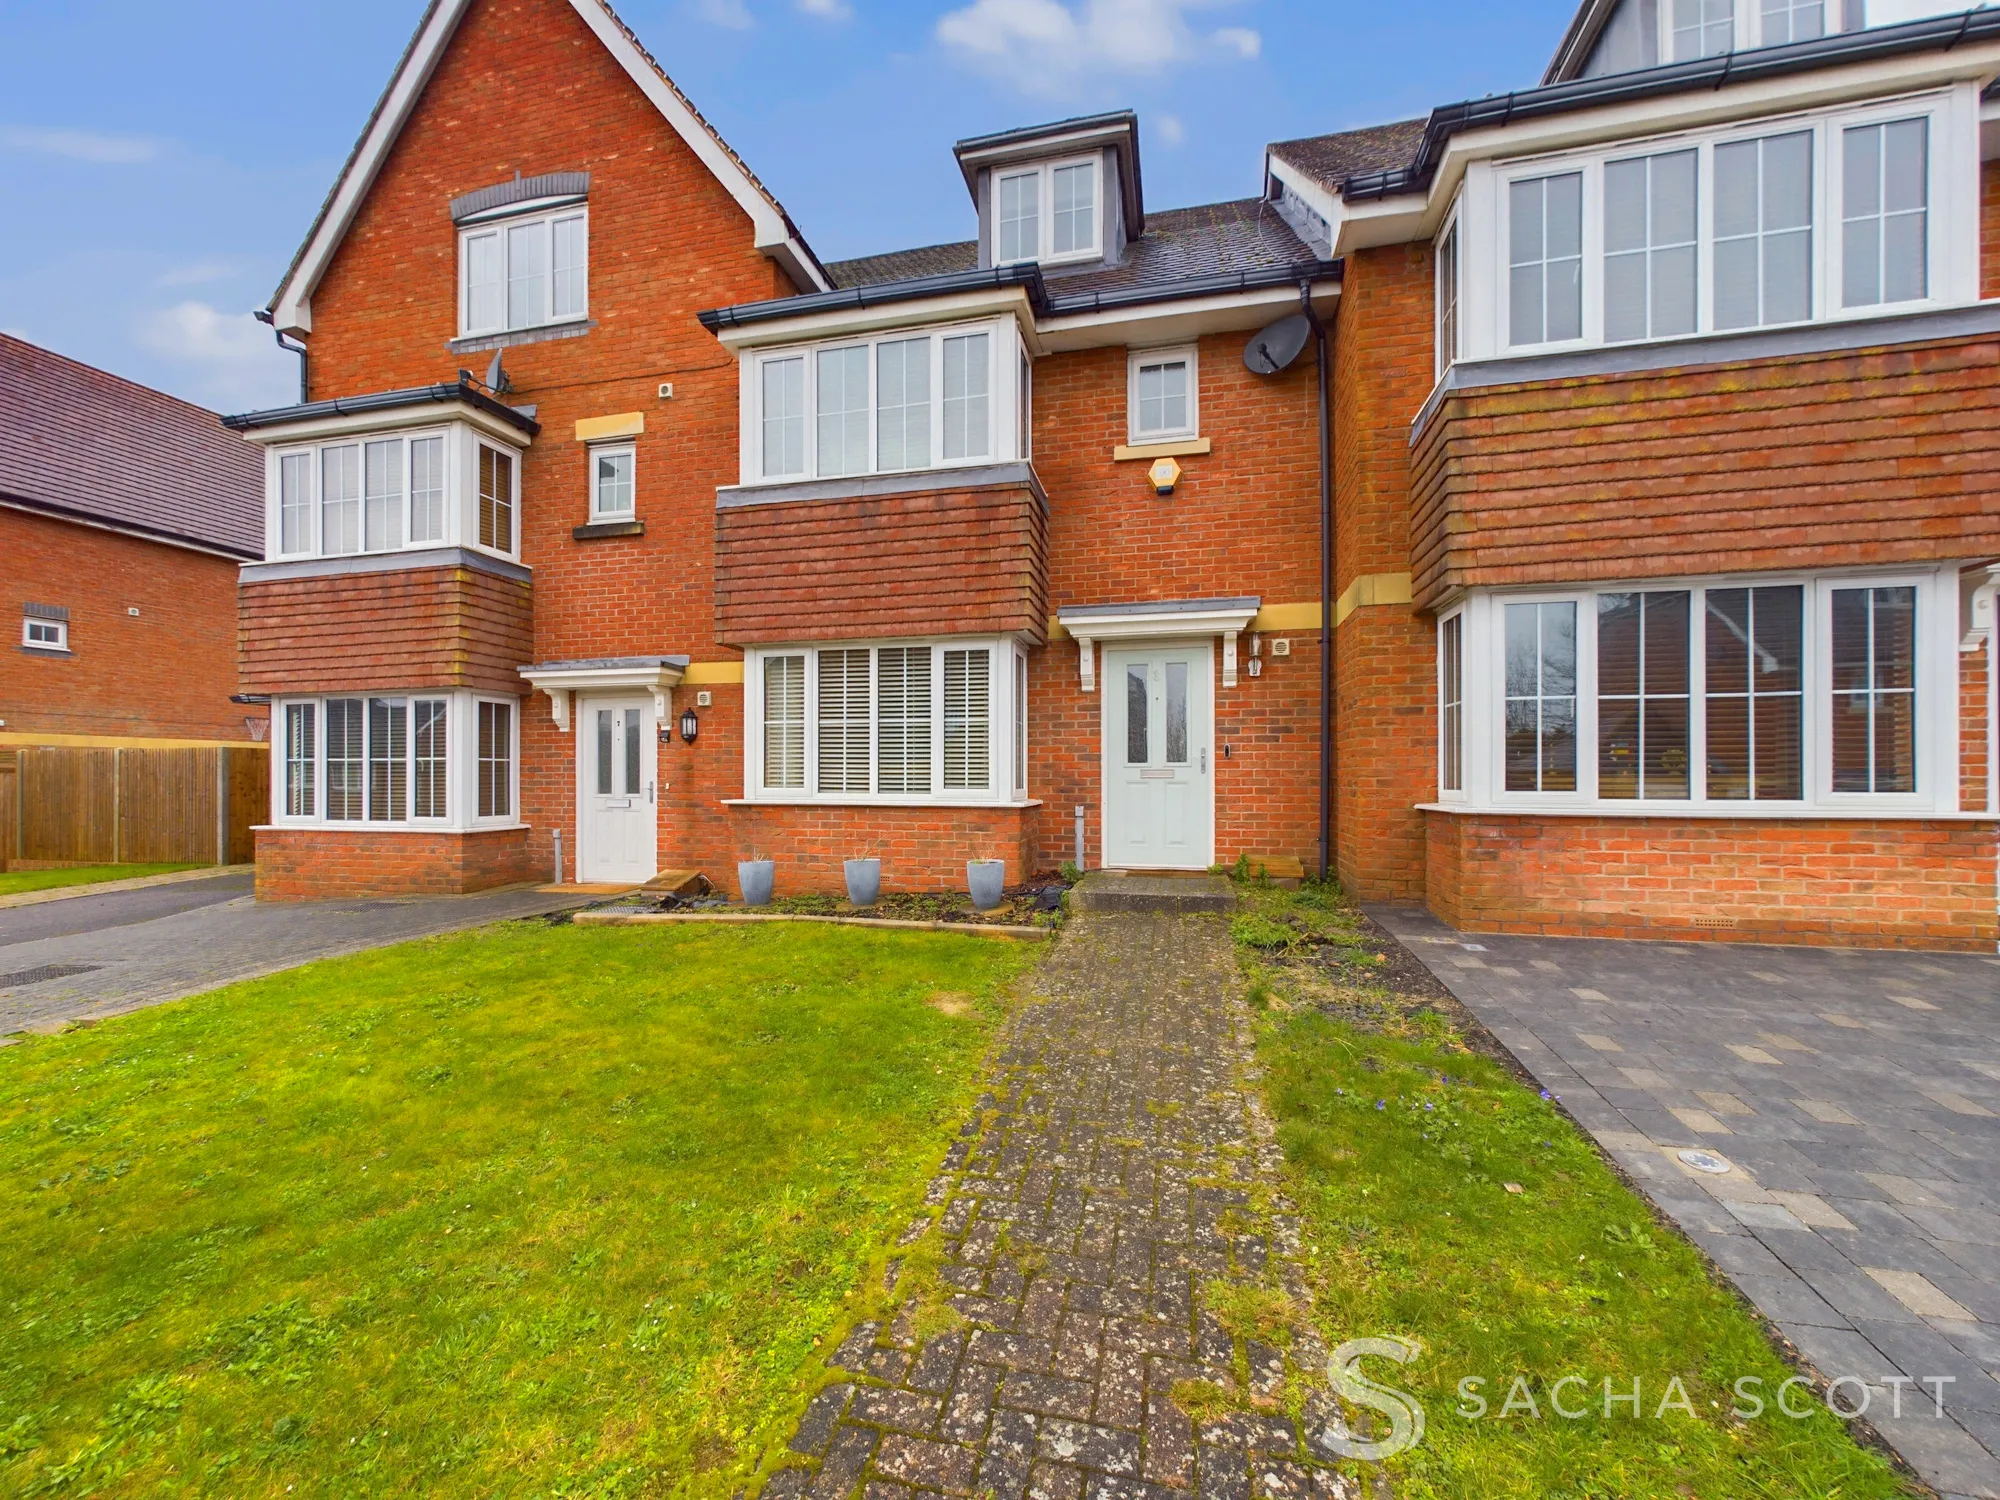 4 bed mid-terraced house for sale in Woodfield Close, Coulsdon  - Property Image 1